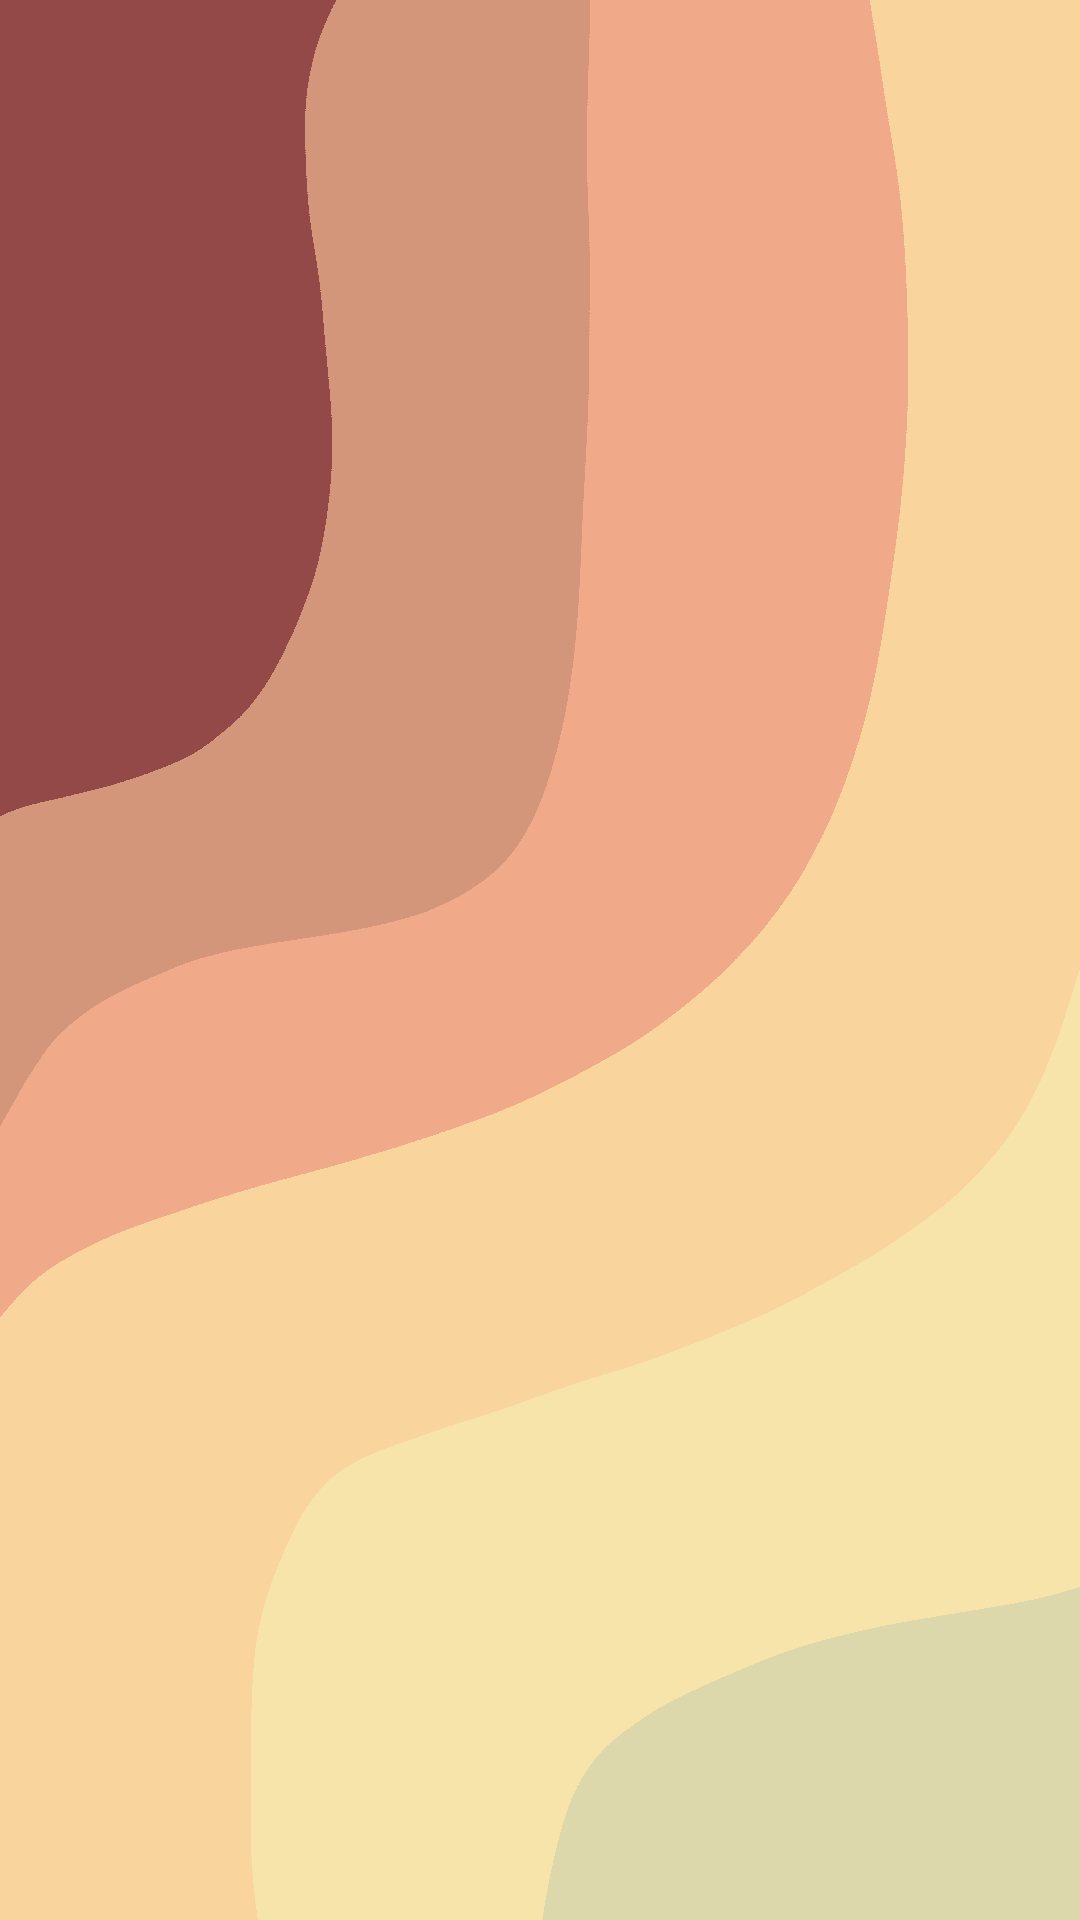 Background featuring soft neutral colors